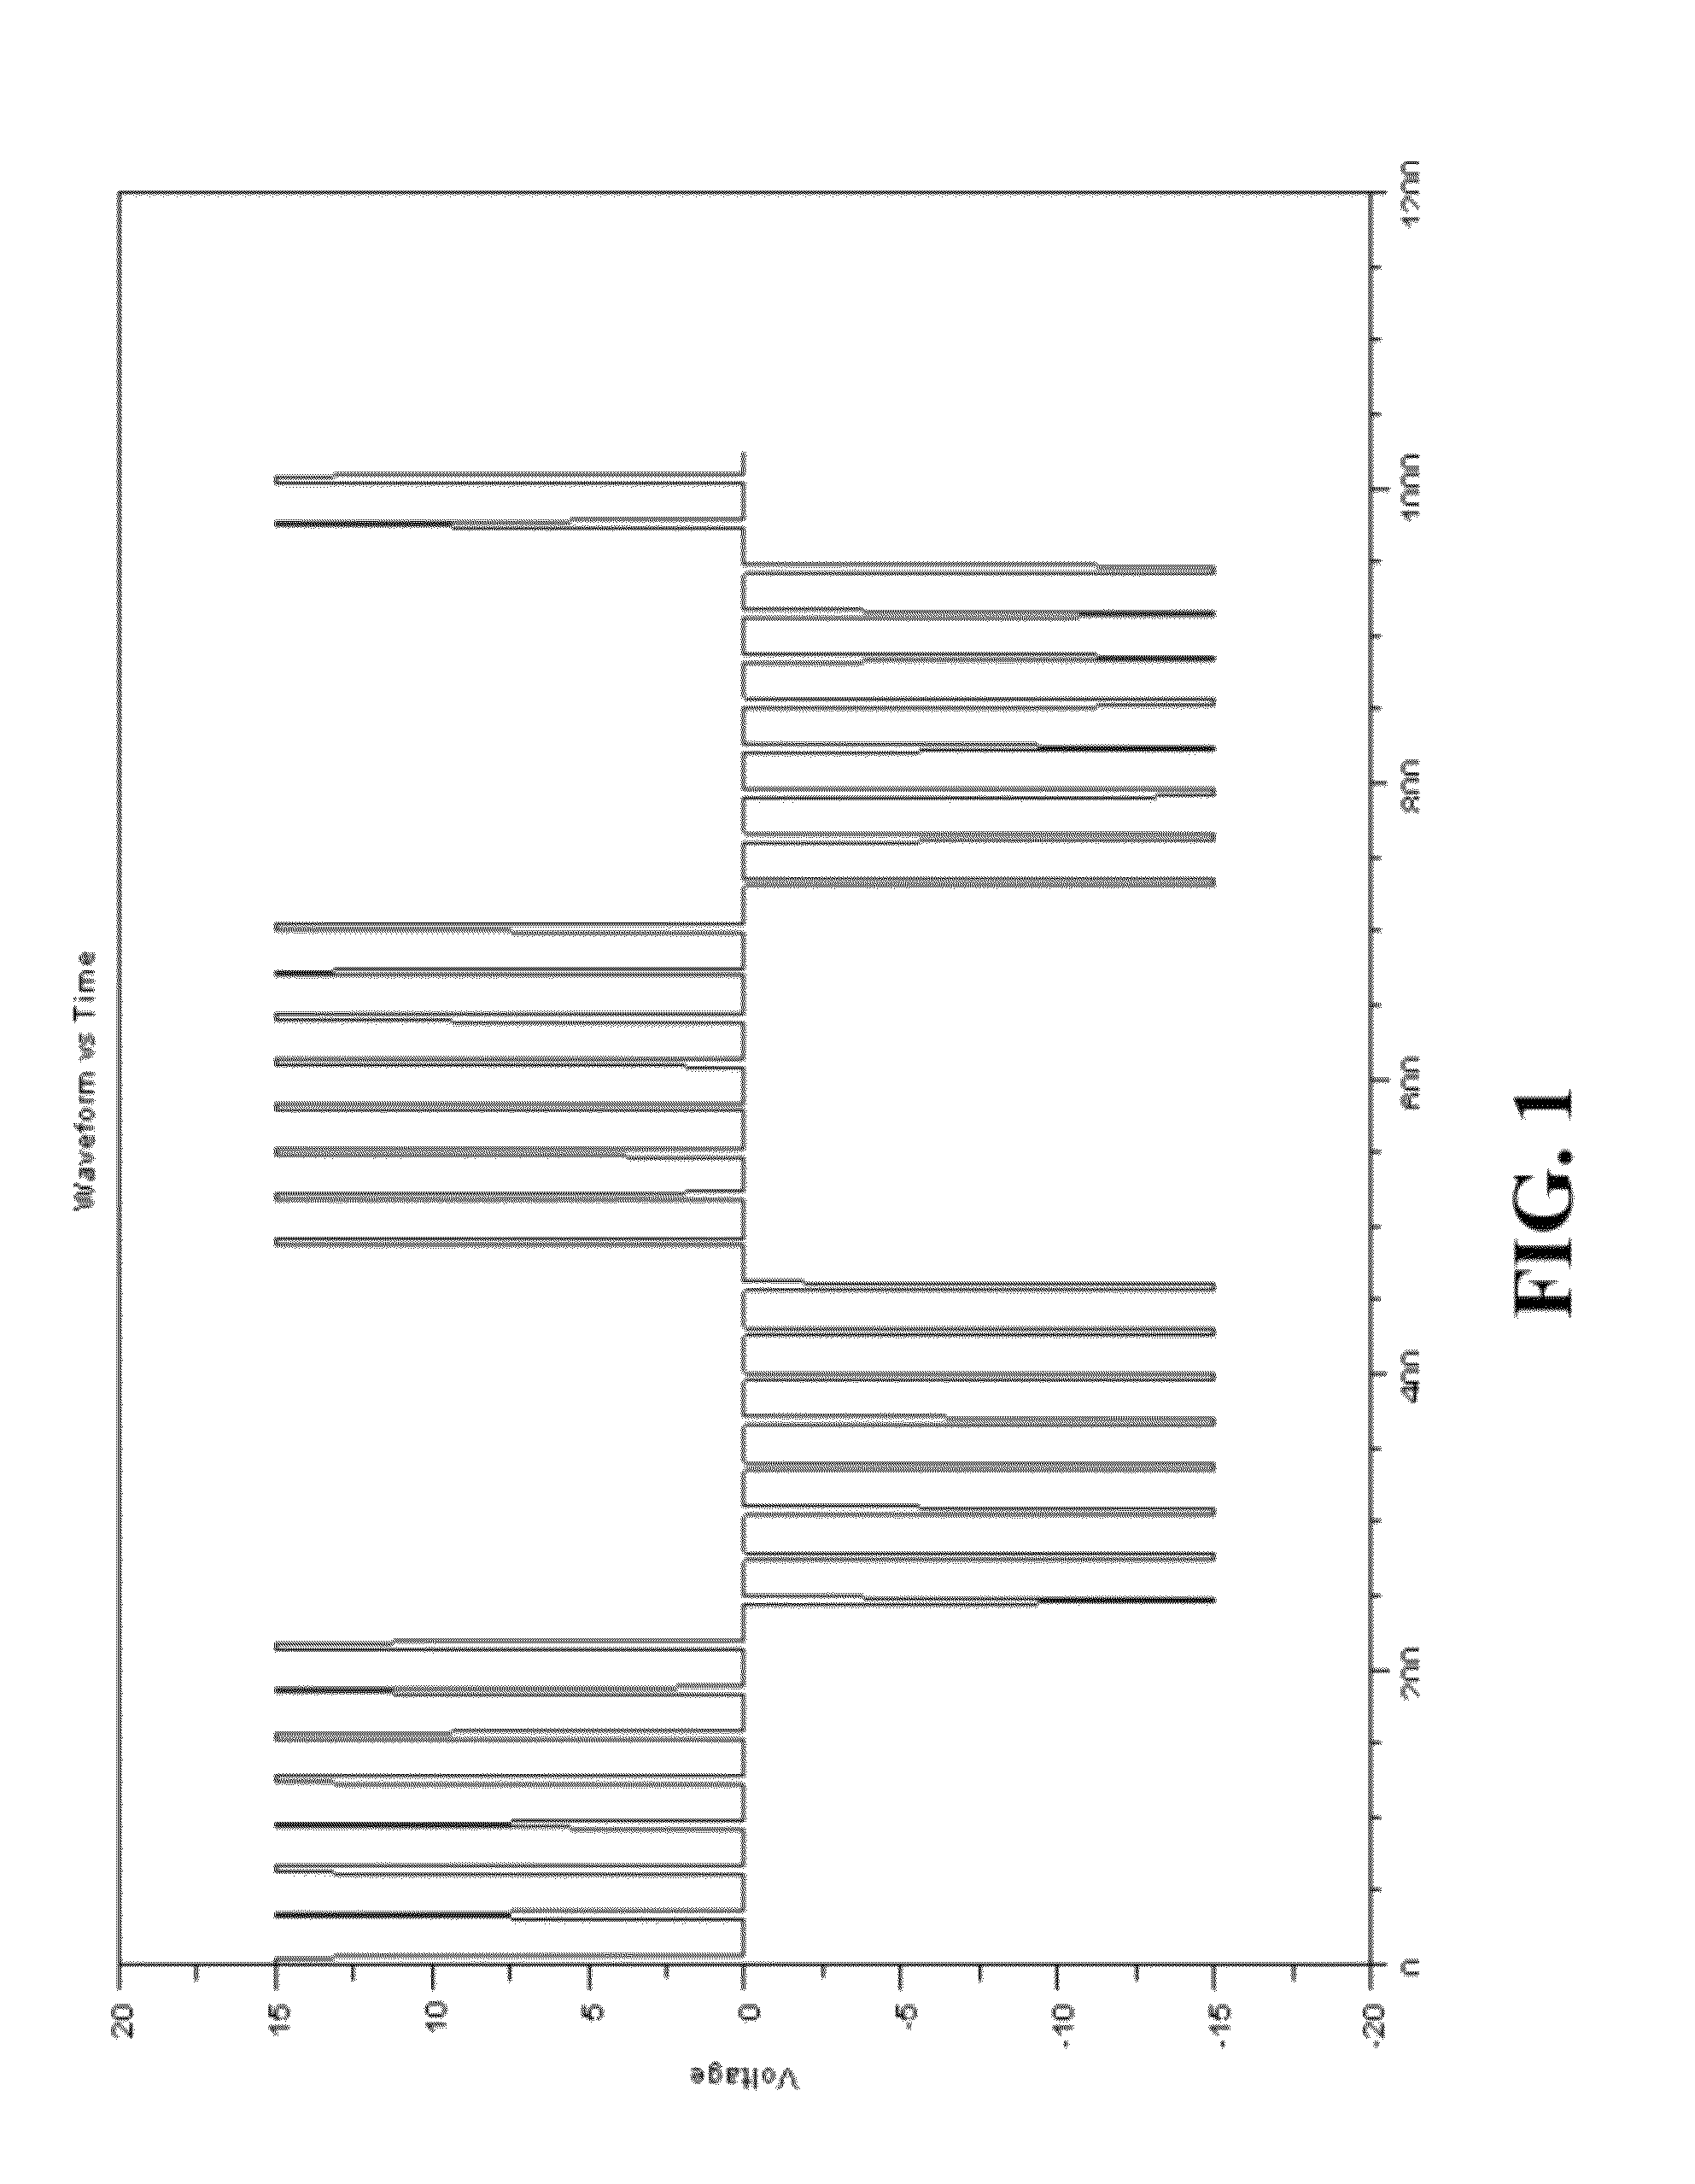 Method and apparatus for electrically generating signal for inducing lucid dreaming